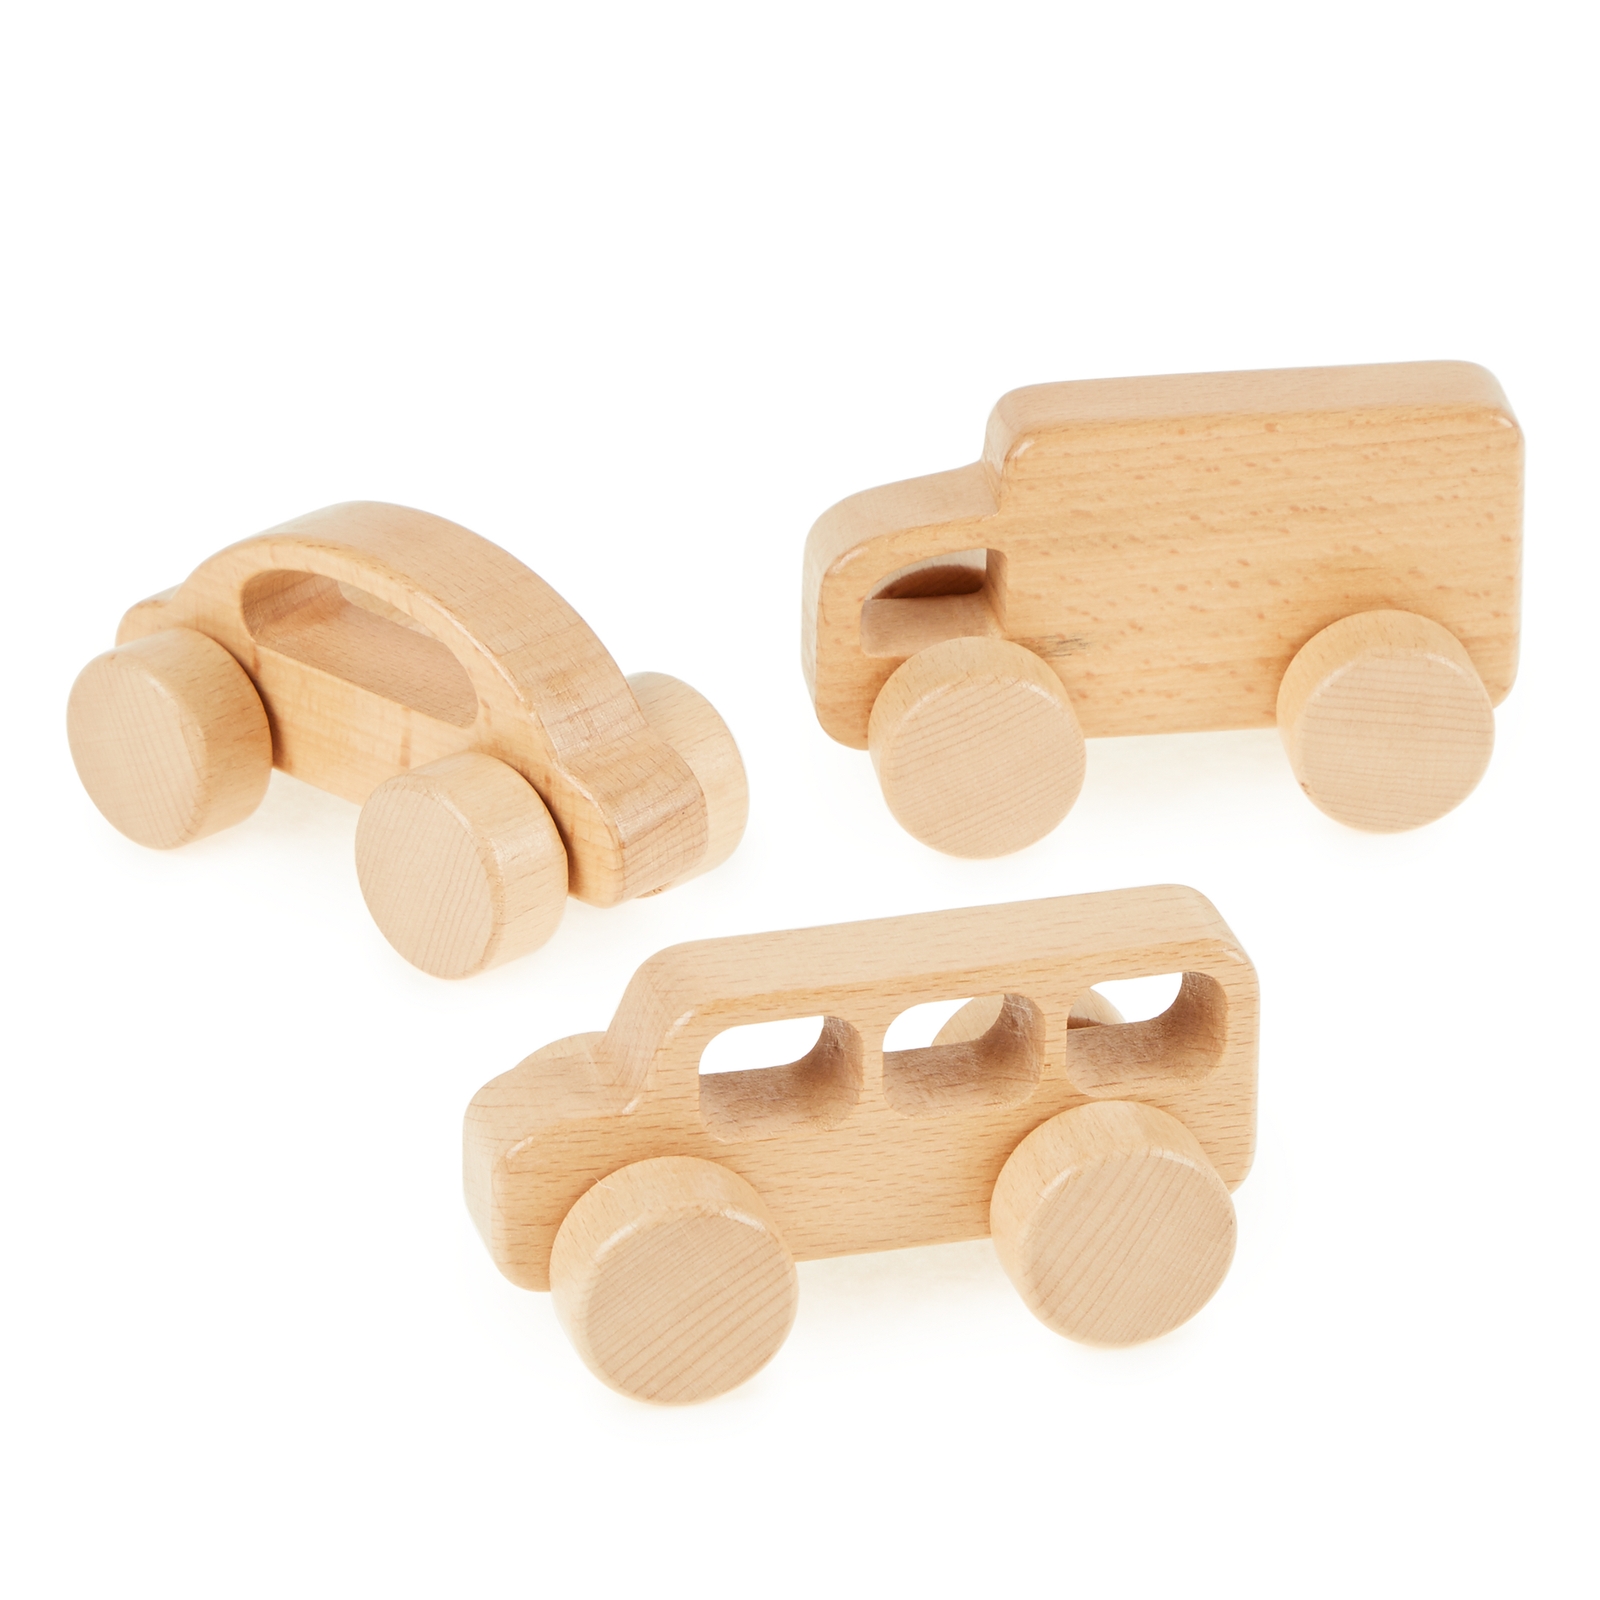 Wooden Vehicles - Assorted - Pack of 3